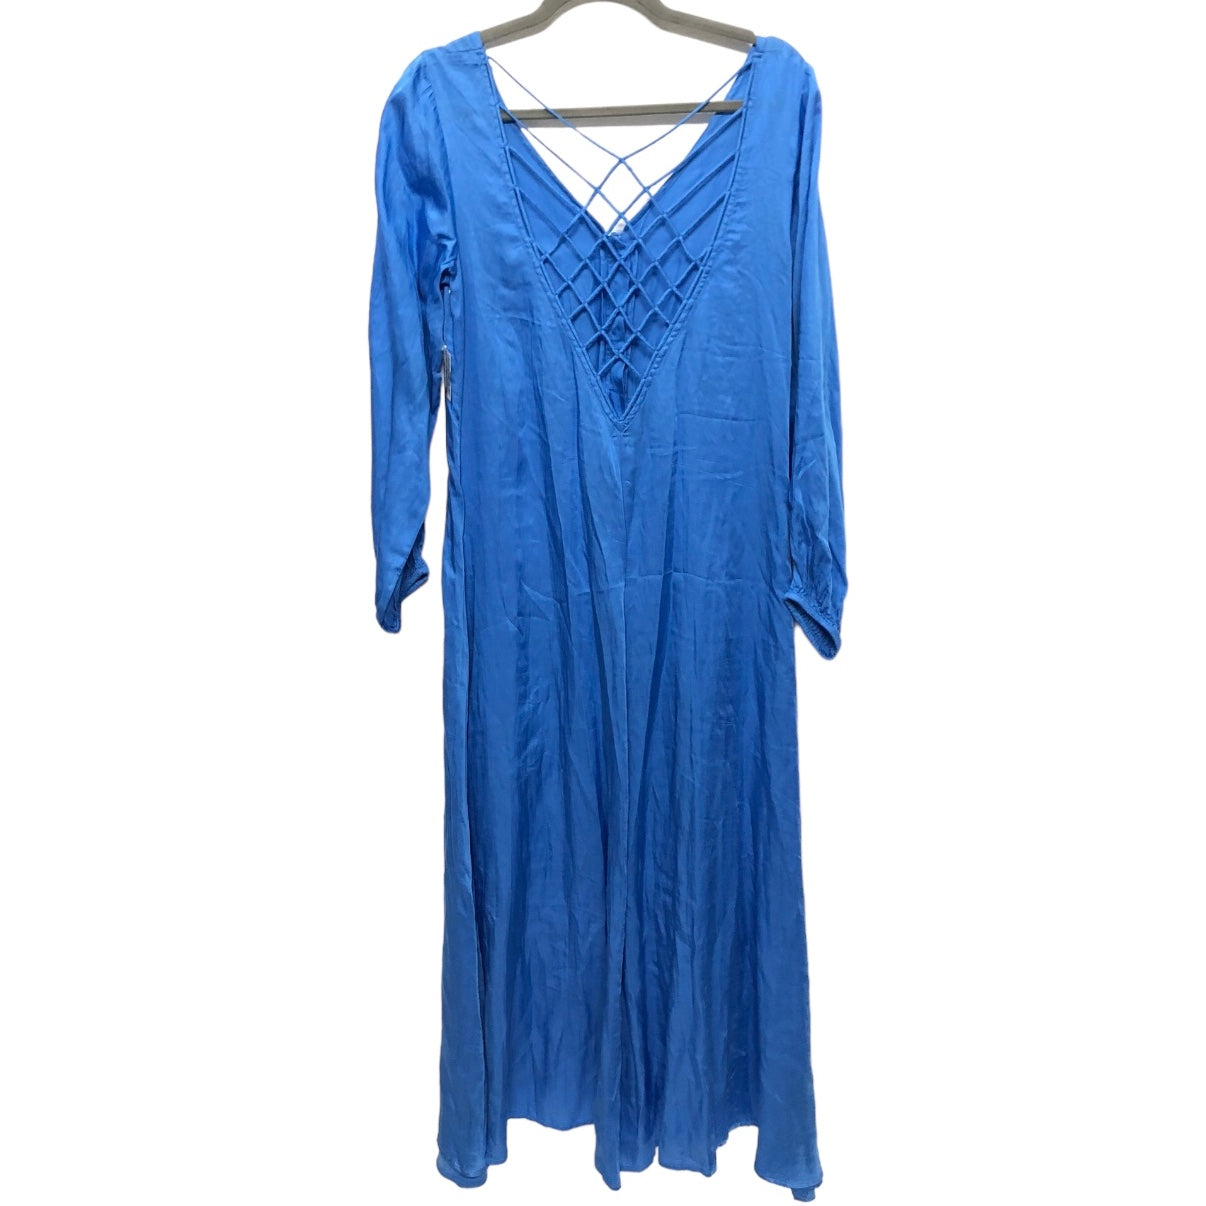 Blue Dress Casual Maxi Free People, Size 10